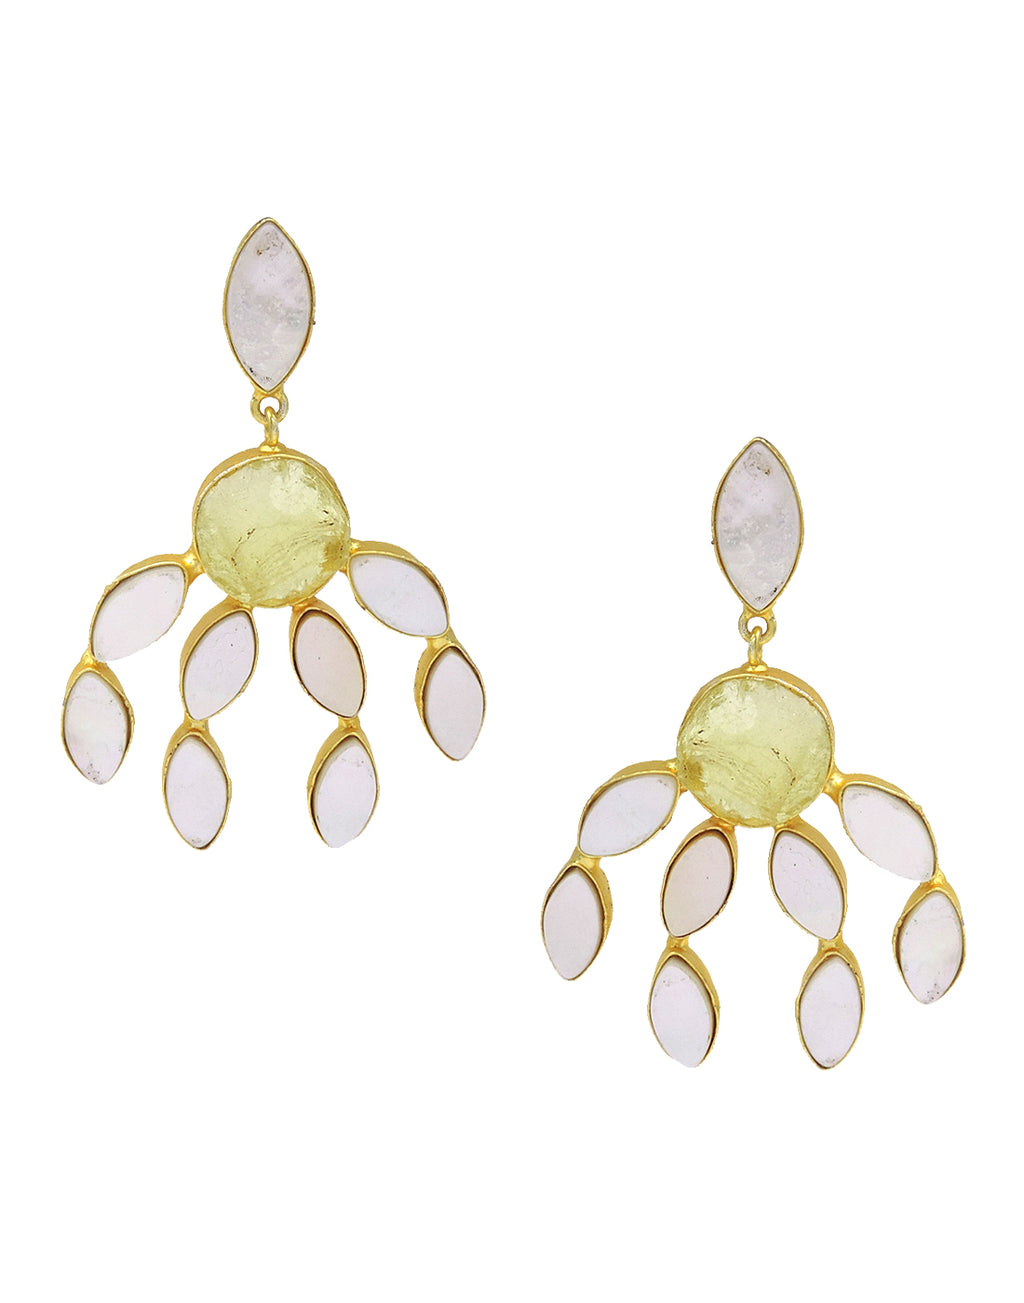 Curtain Earrings (Citrine) - Statement Earrings - Gold-Plated & Hypoallergenic - Made in India - Dubai Jewellery - Dori